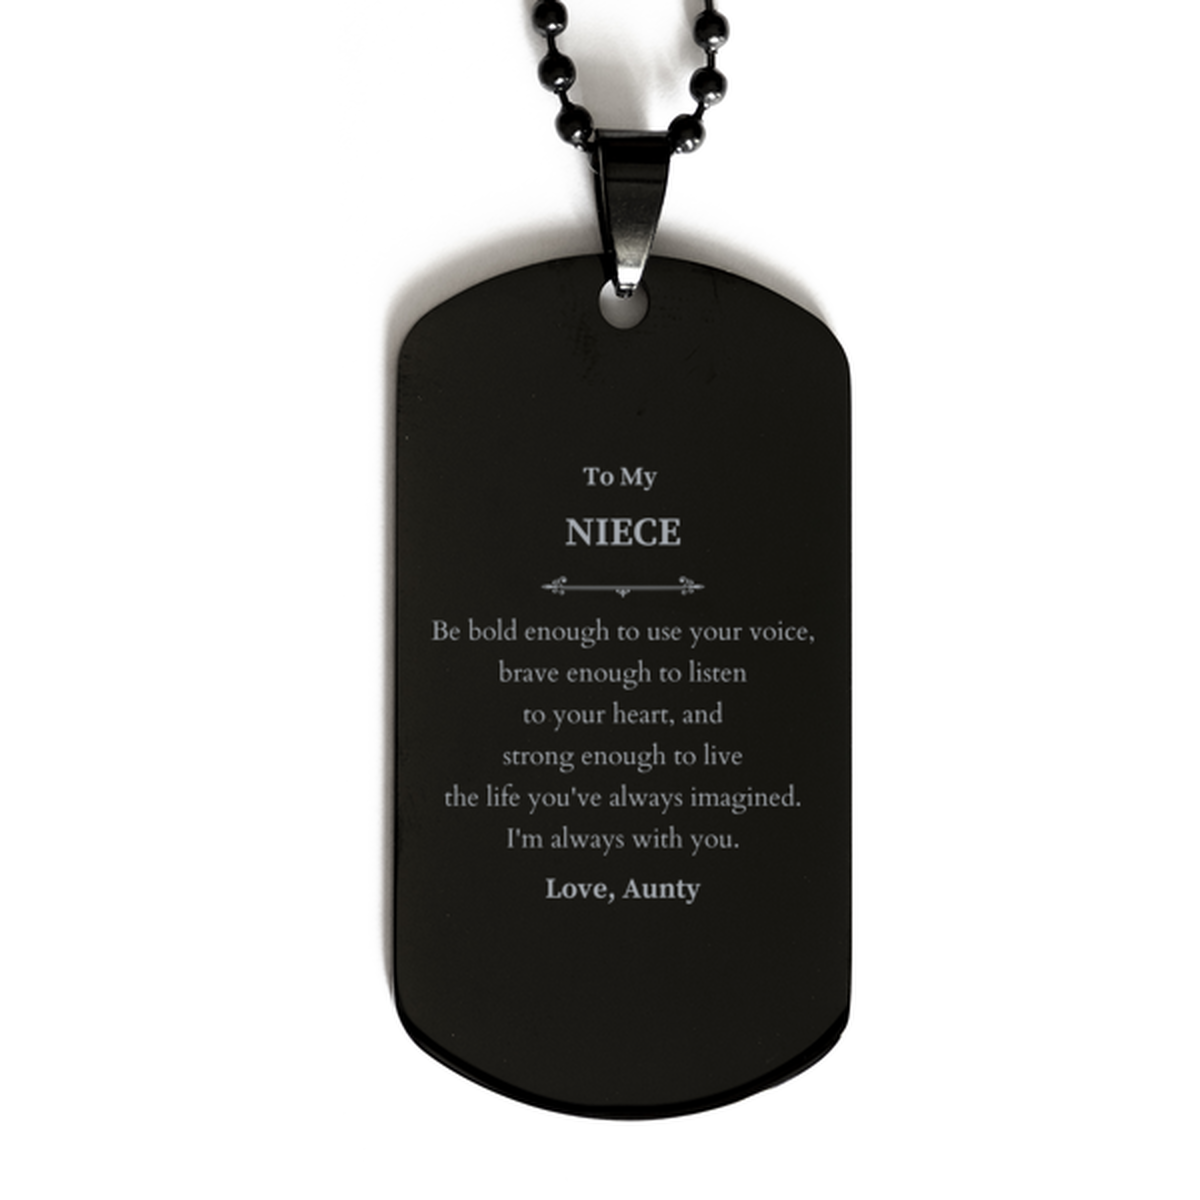 Keepsake Niece Black Dog Tag Gift Idea Graduation Christmas Birthday Niece from Aunty, Niece Be bold enough to use your voice, brave enough to listen to your heart. Love, Aunty